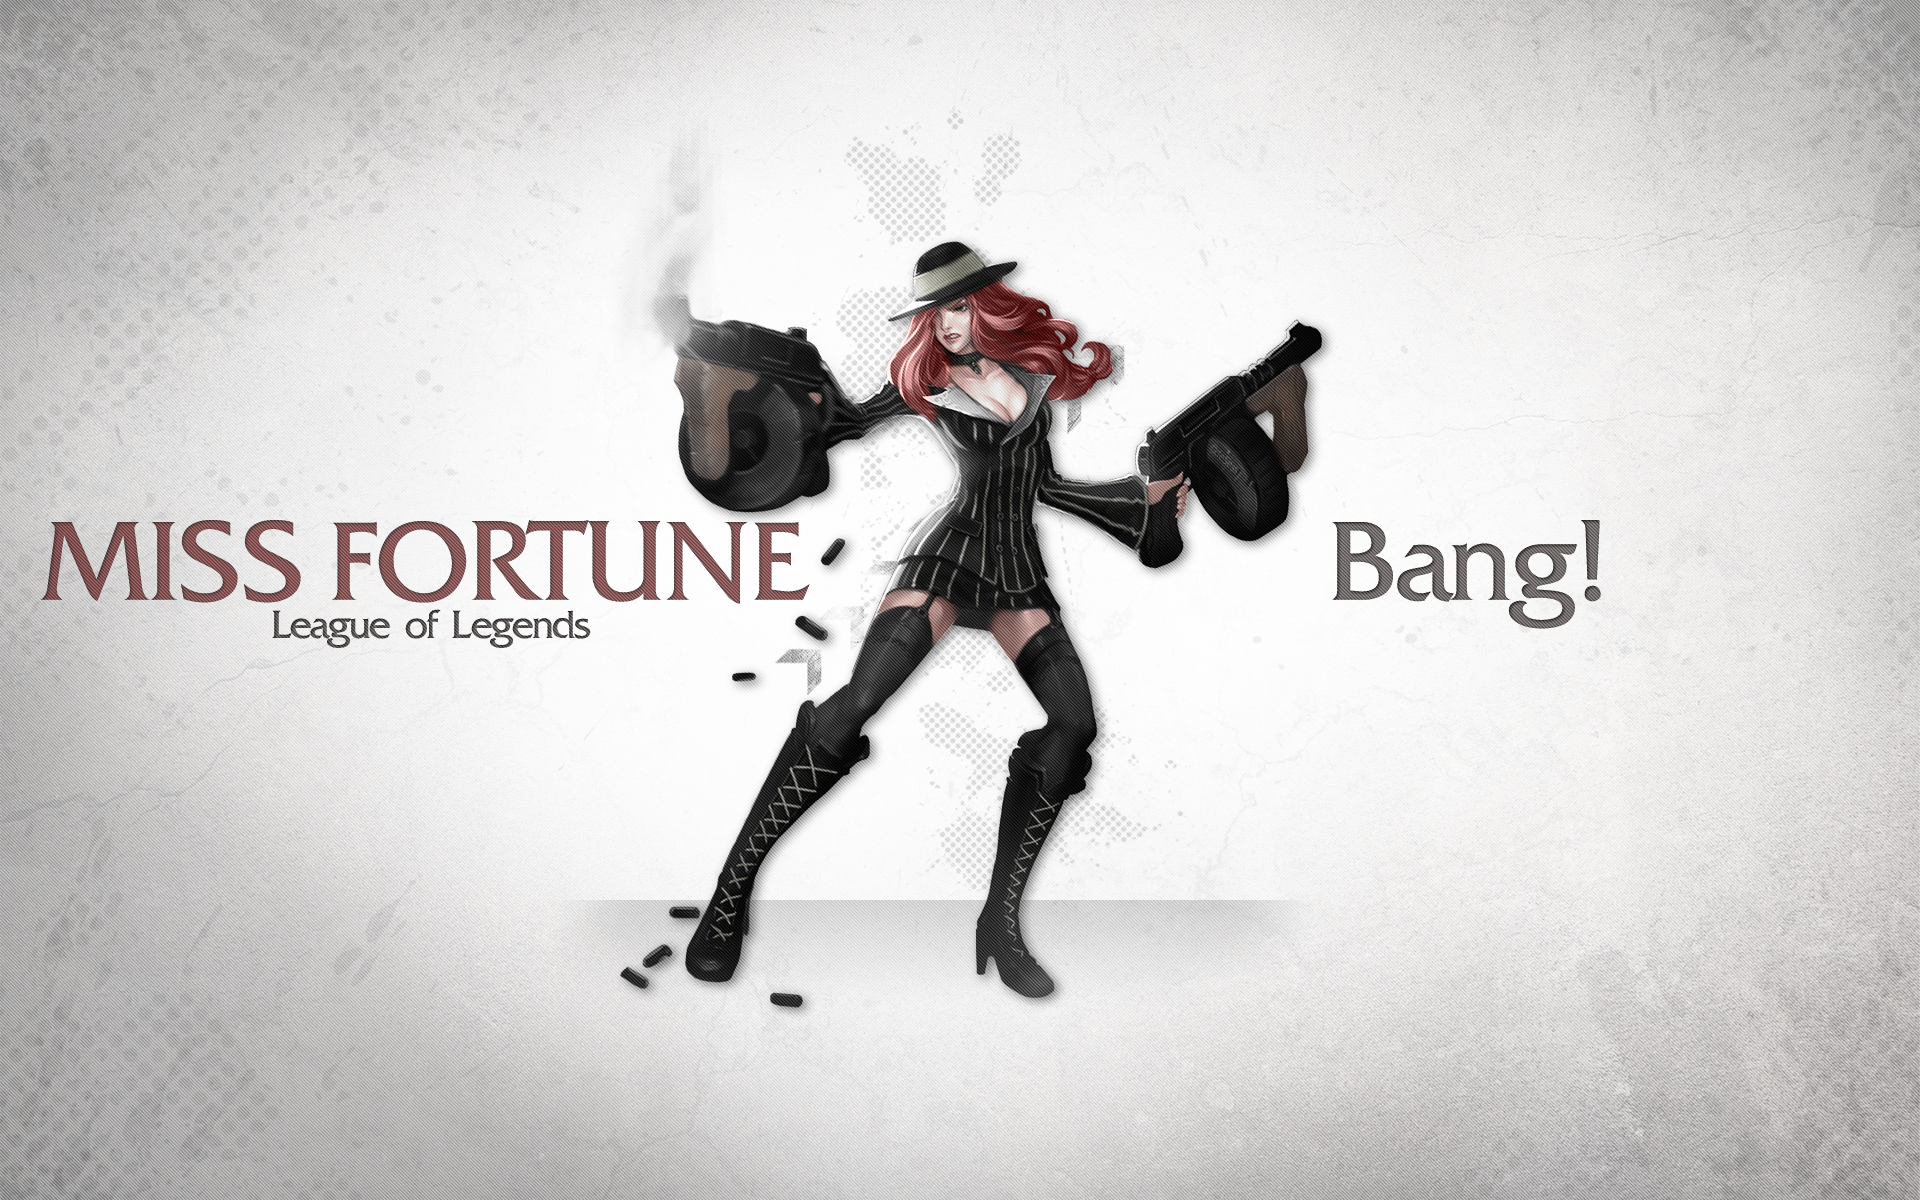 General 1920x1200 Miss Fortune (League of Legends) League of Legends PC gaming weapon redhead hat video game girls girls with guns stockings cleavage video game art